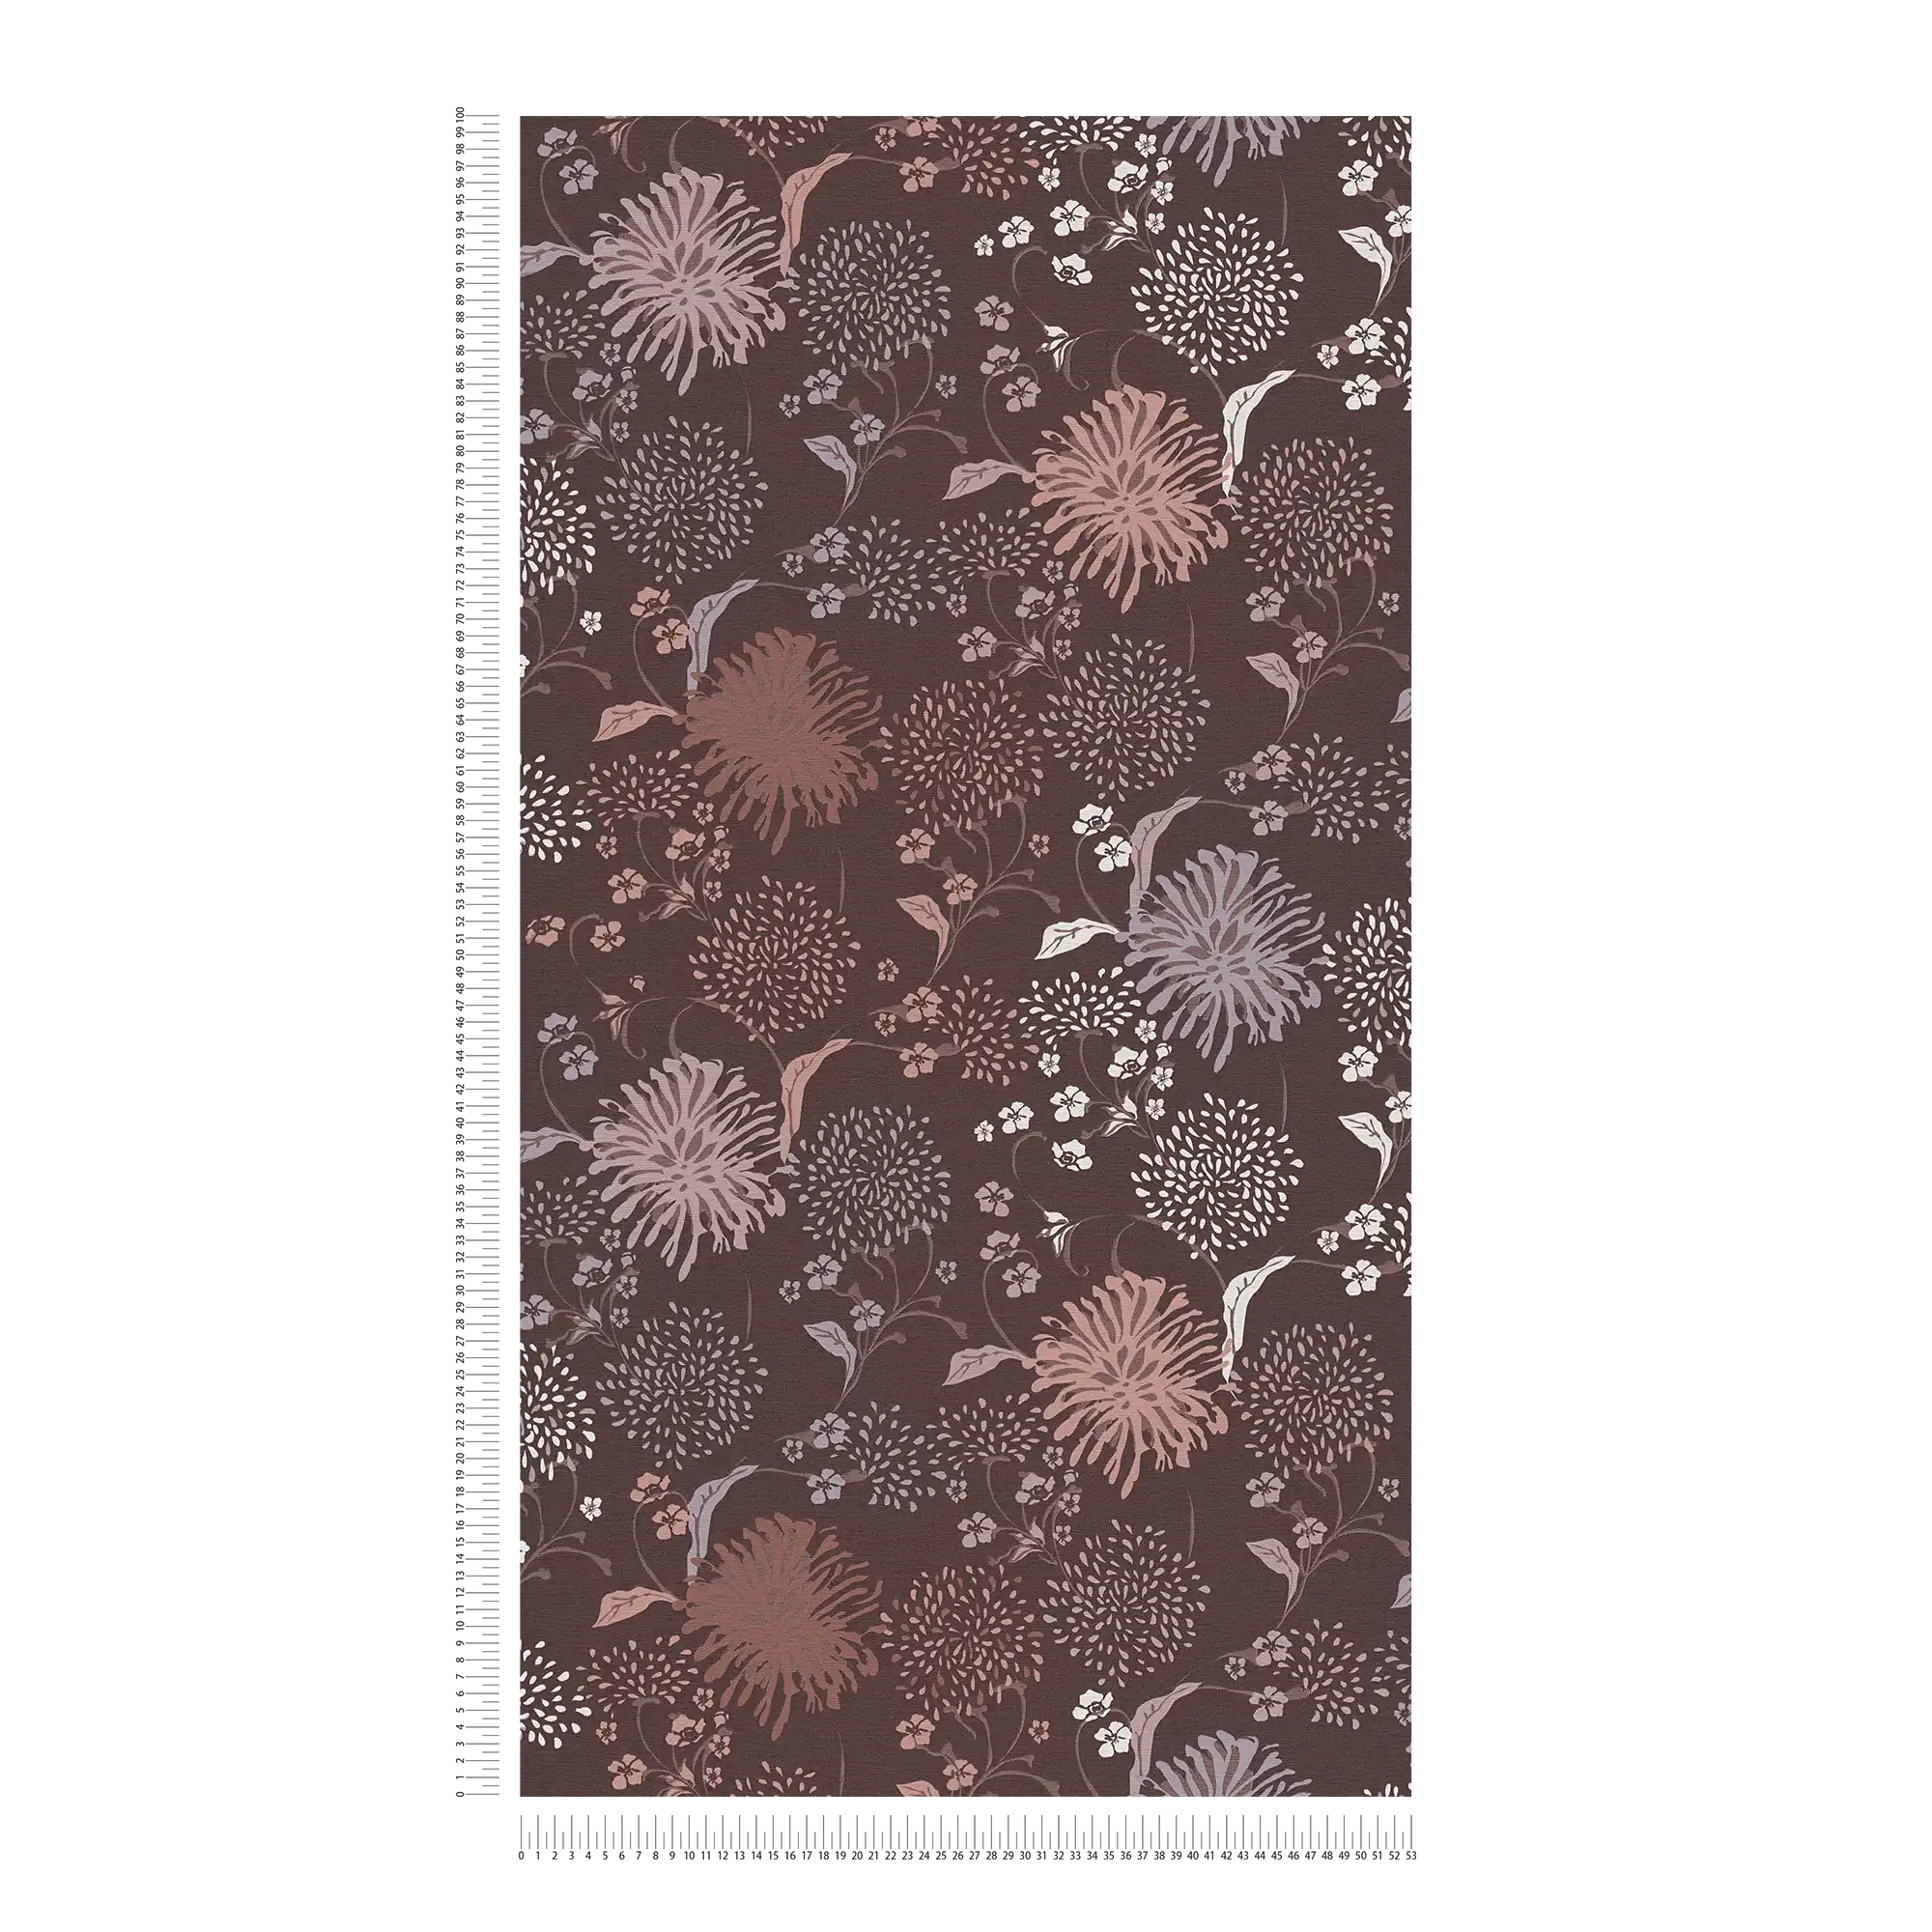             Floral wallpaper with playful pattern & linen look - wine red, grey, white
        